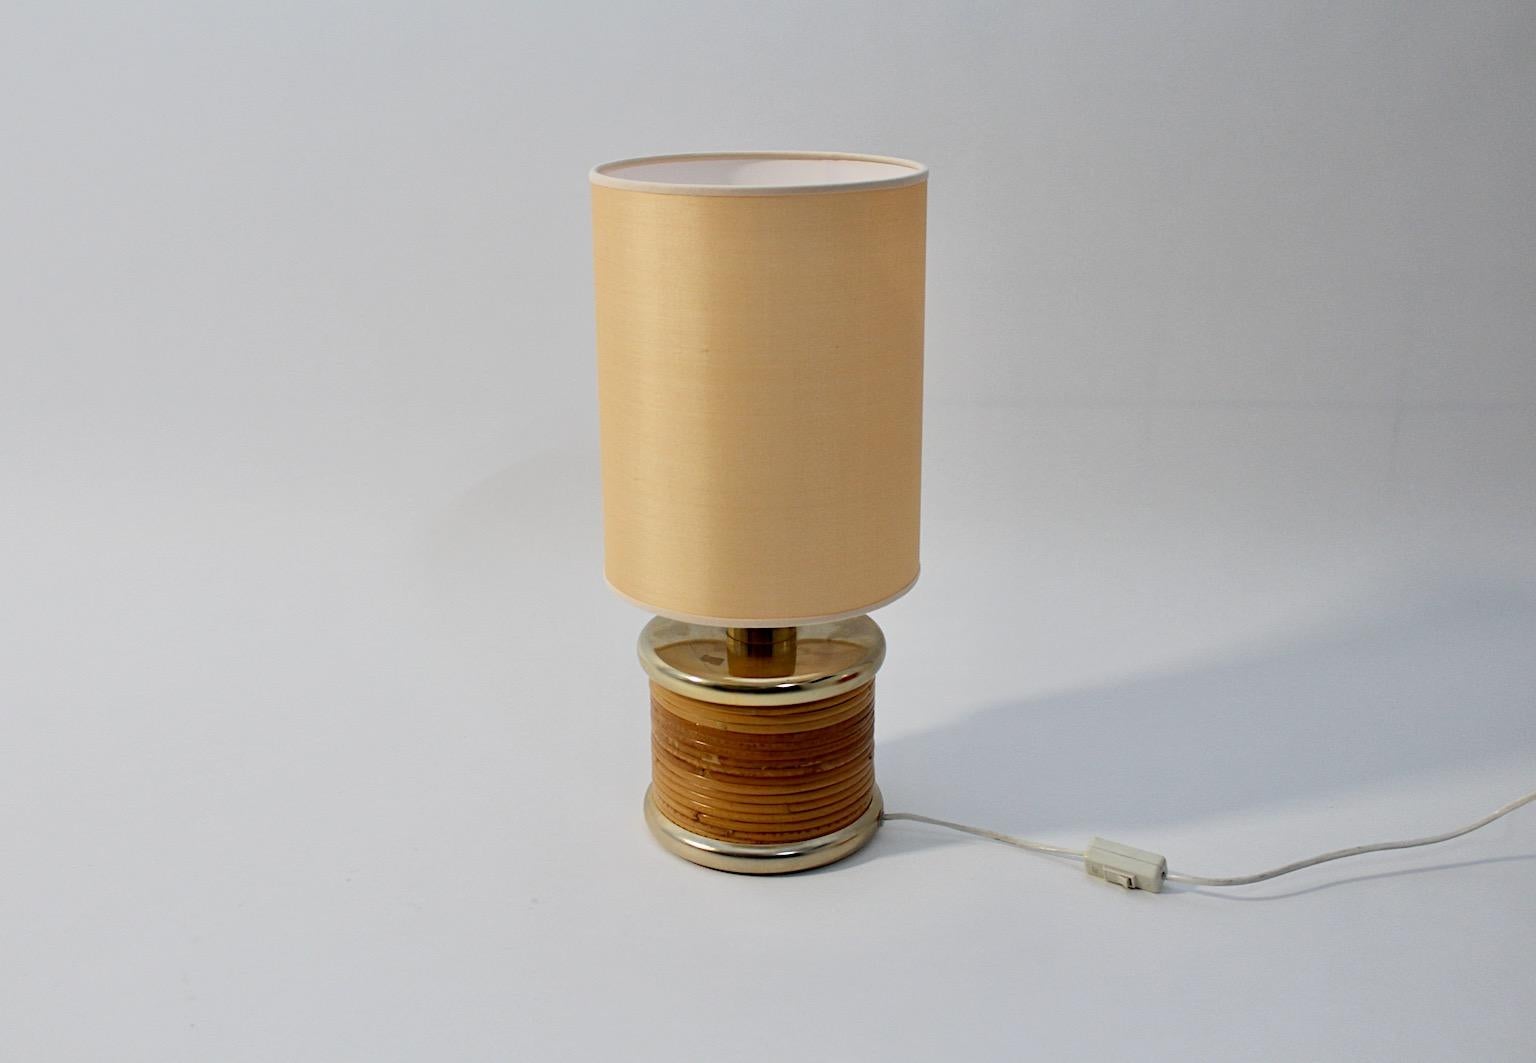 Organic Modern vintage circular table lamp from rattan and brass in golden color 1970s Italy.
A wonderful organic modern circular - like table lamp circa 1970 Italy.
Stunning rattan network features the table lamp, while a replaced lamp shade in